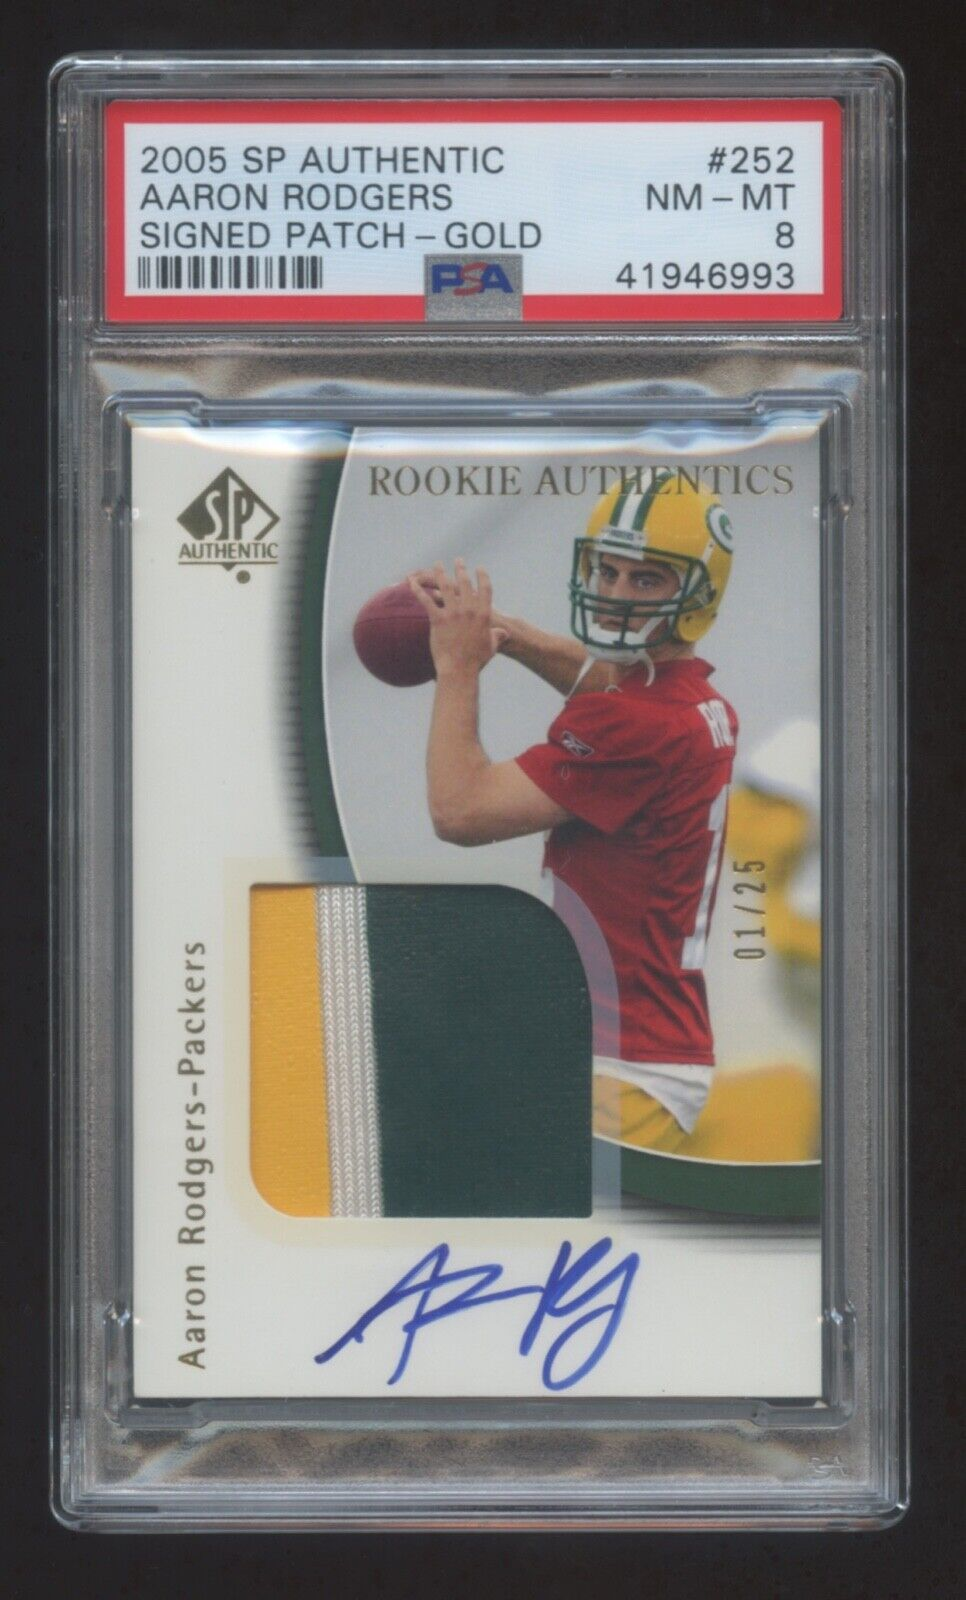 Most valuable Aaron Rodgers rookie cards: 2005 SP authentic autograph jersey